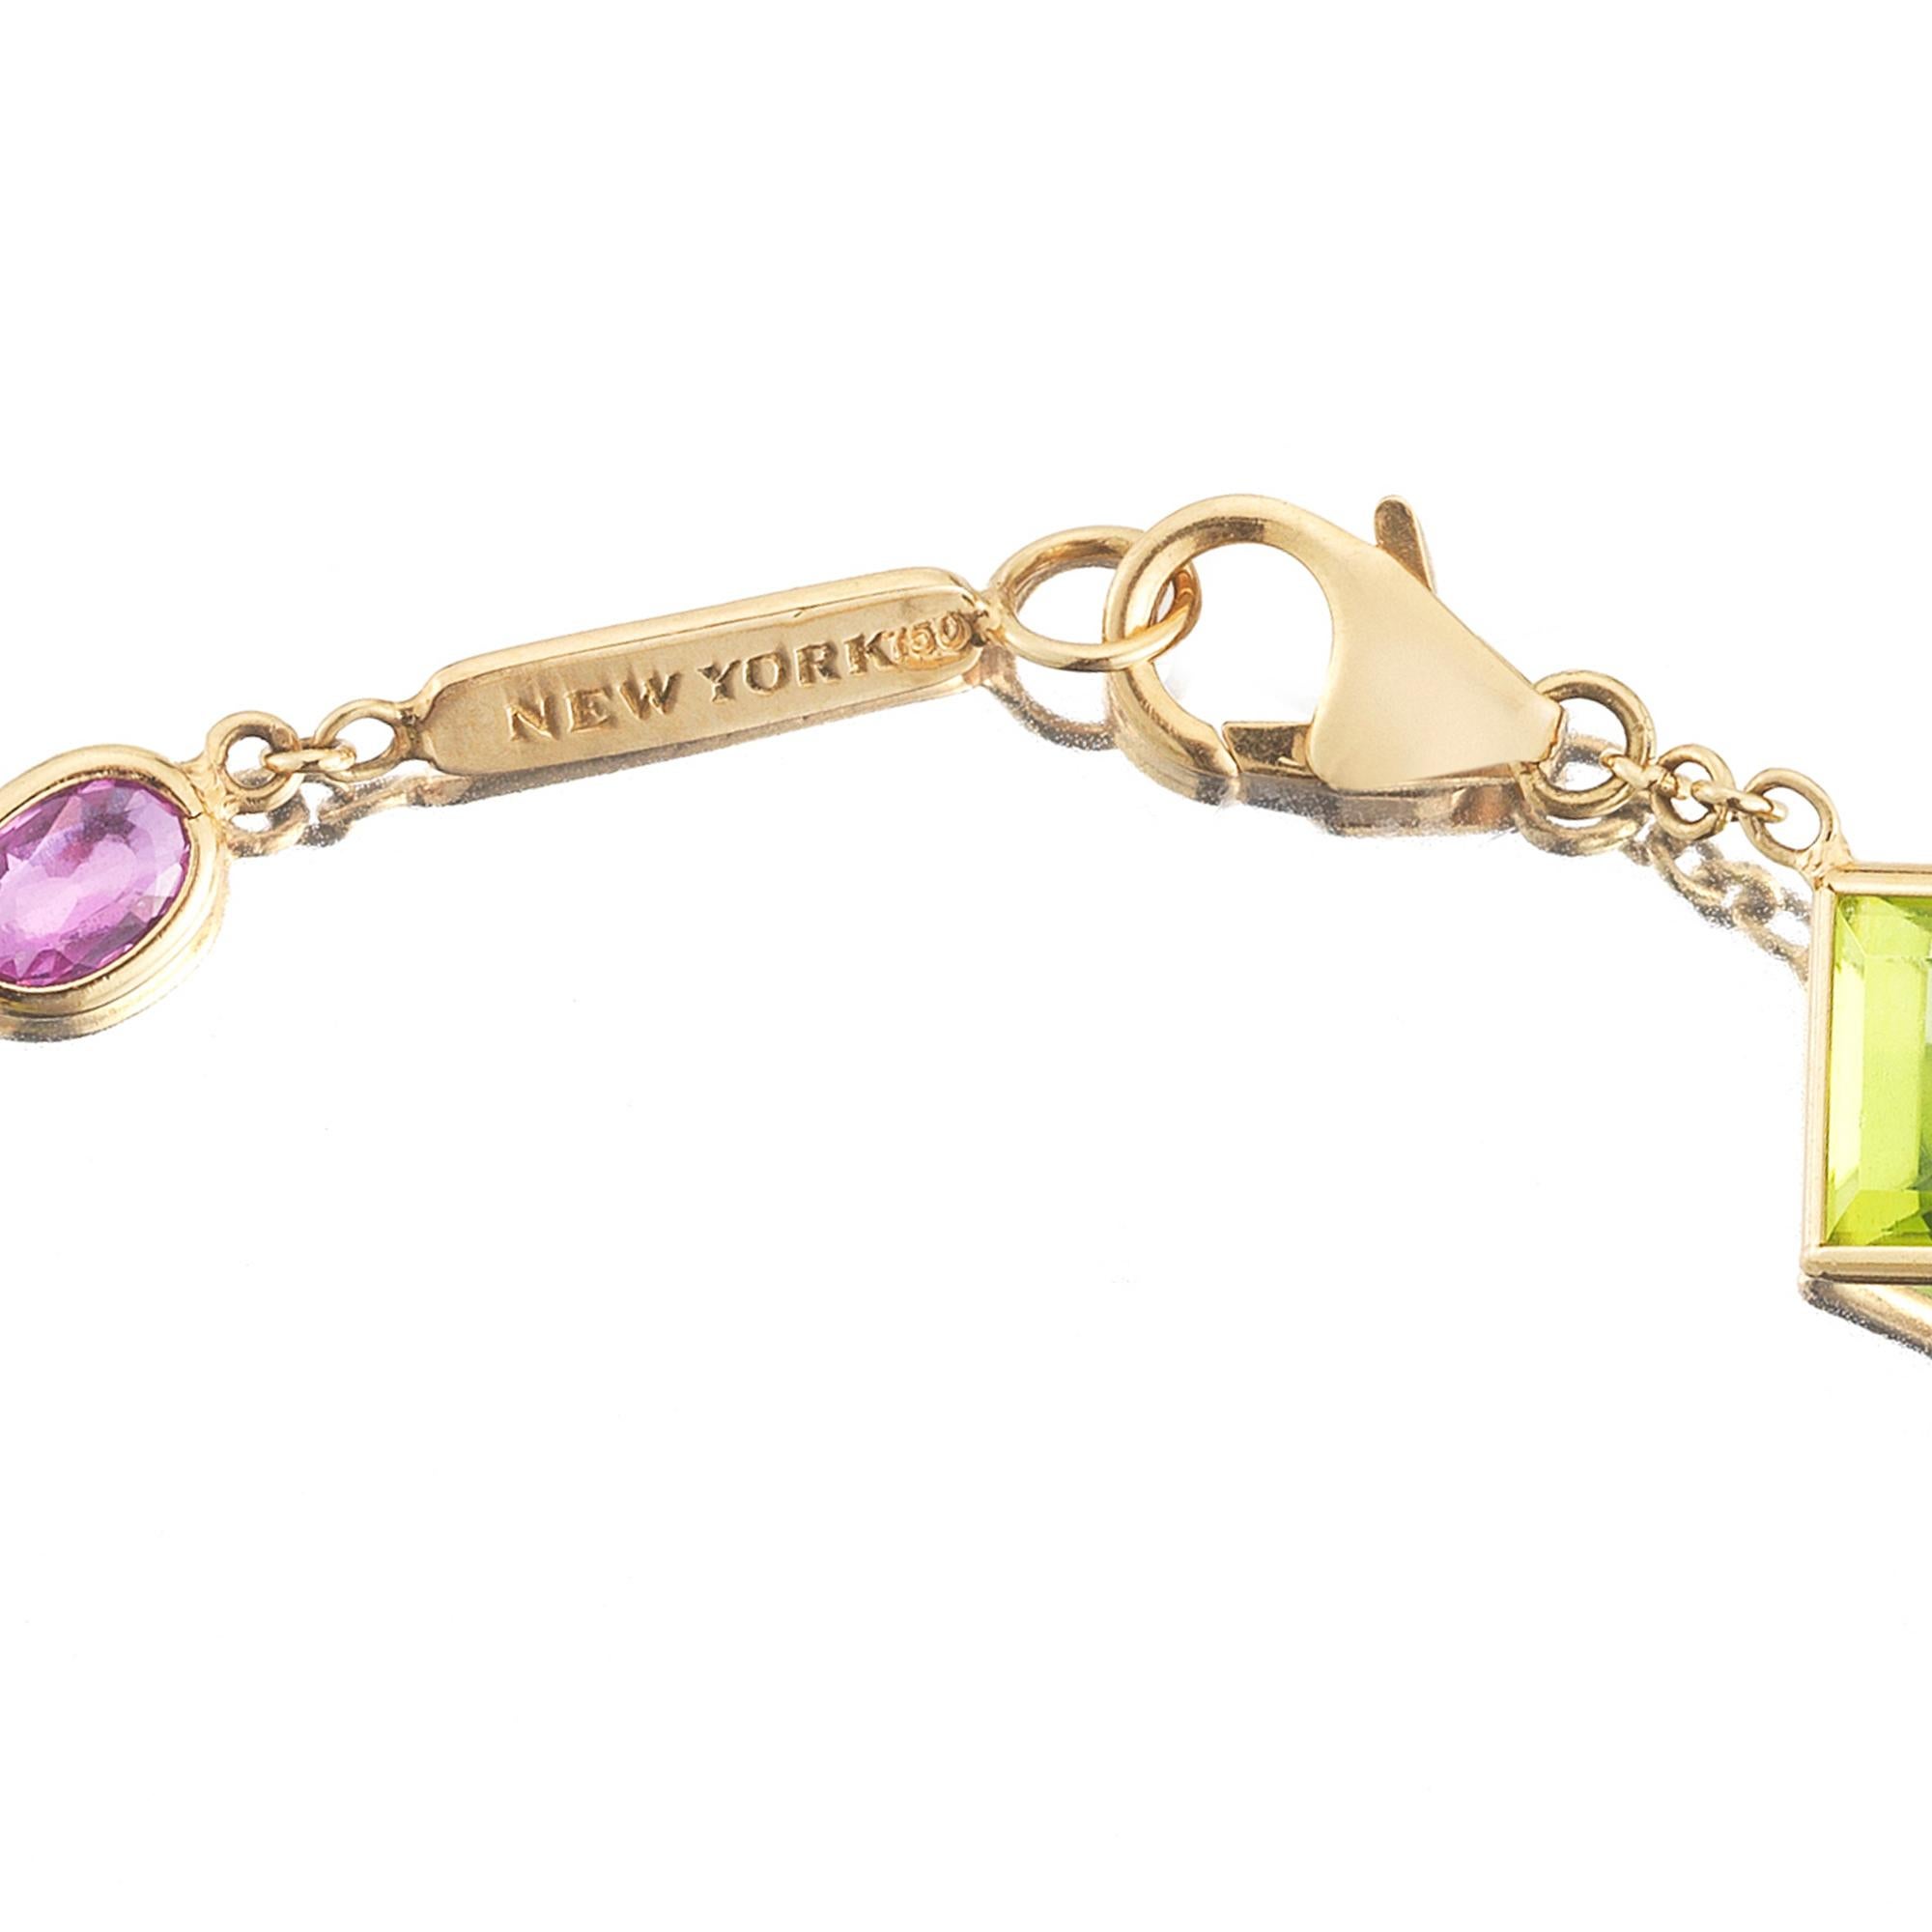 Emerald Cut Paolo Costagli 18K Yellow Gold Florentine Bracelet with Peridot & Pink Sapphires For Sale